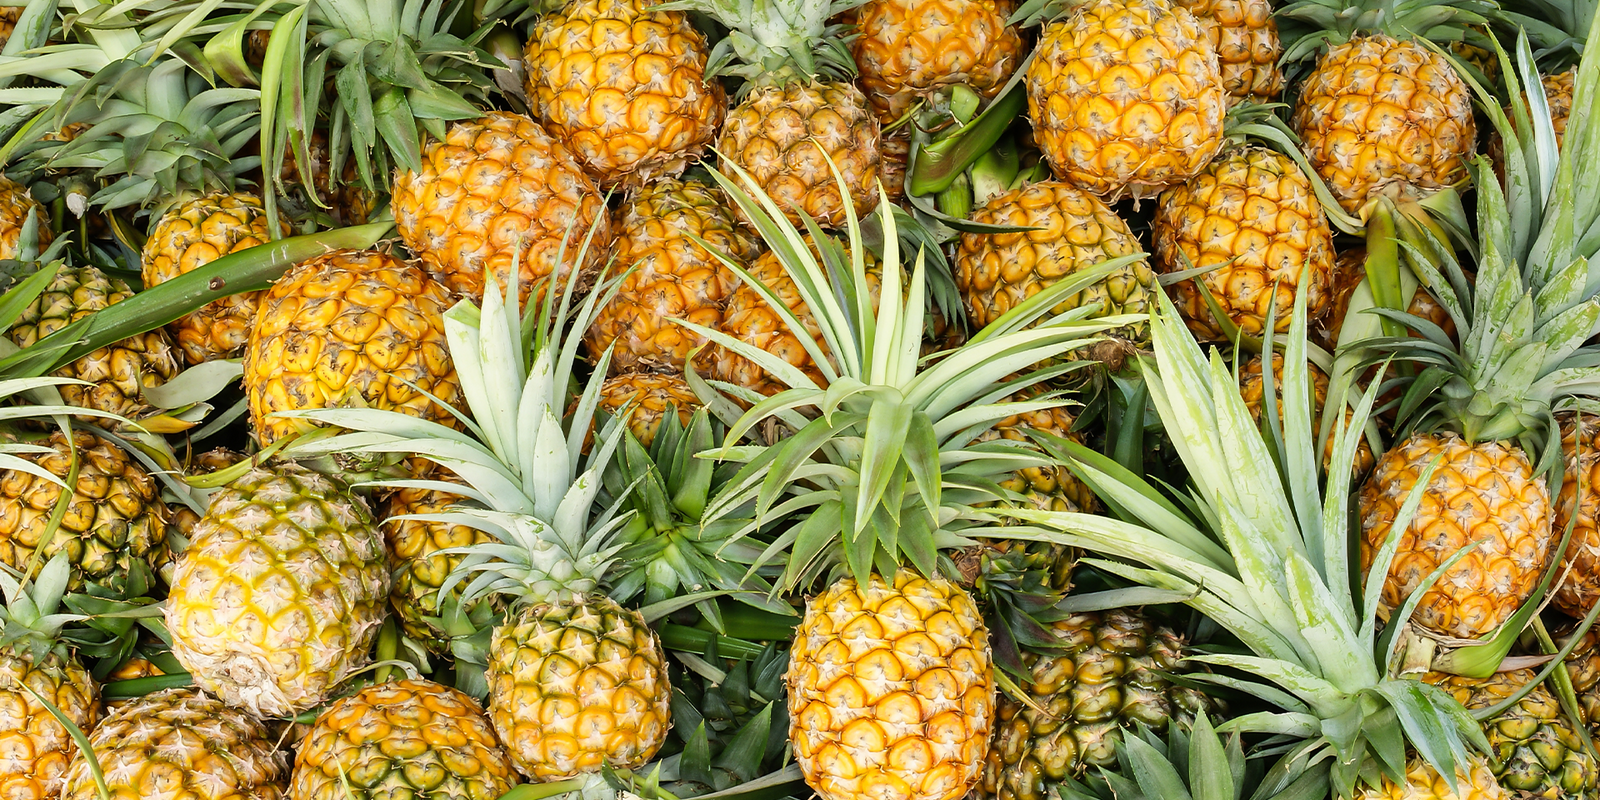 Does pineapple juice help you lose weight?